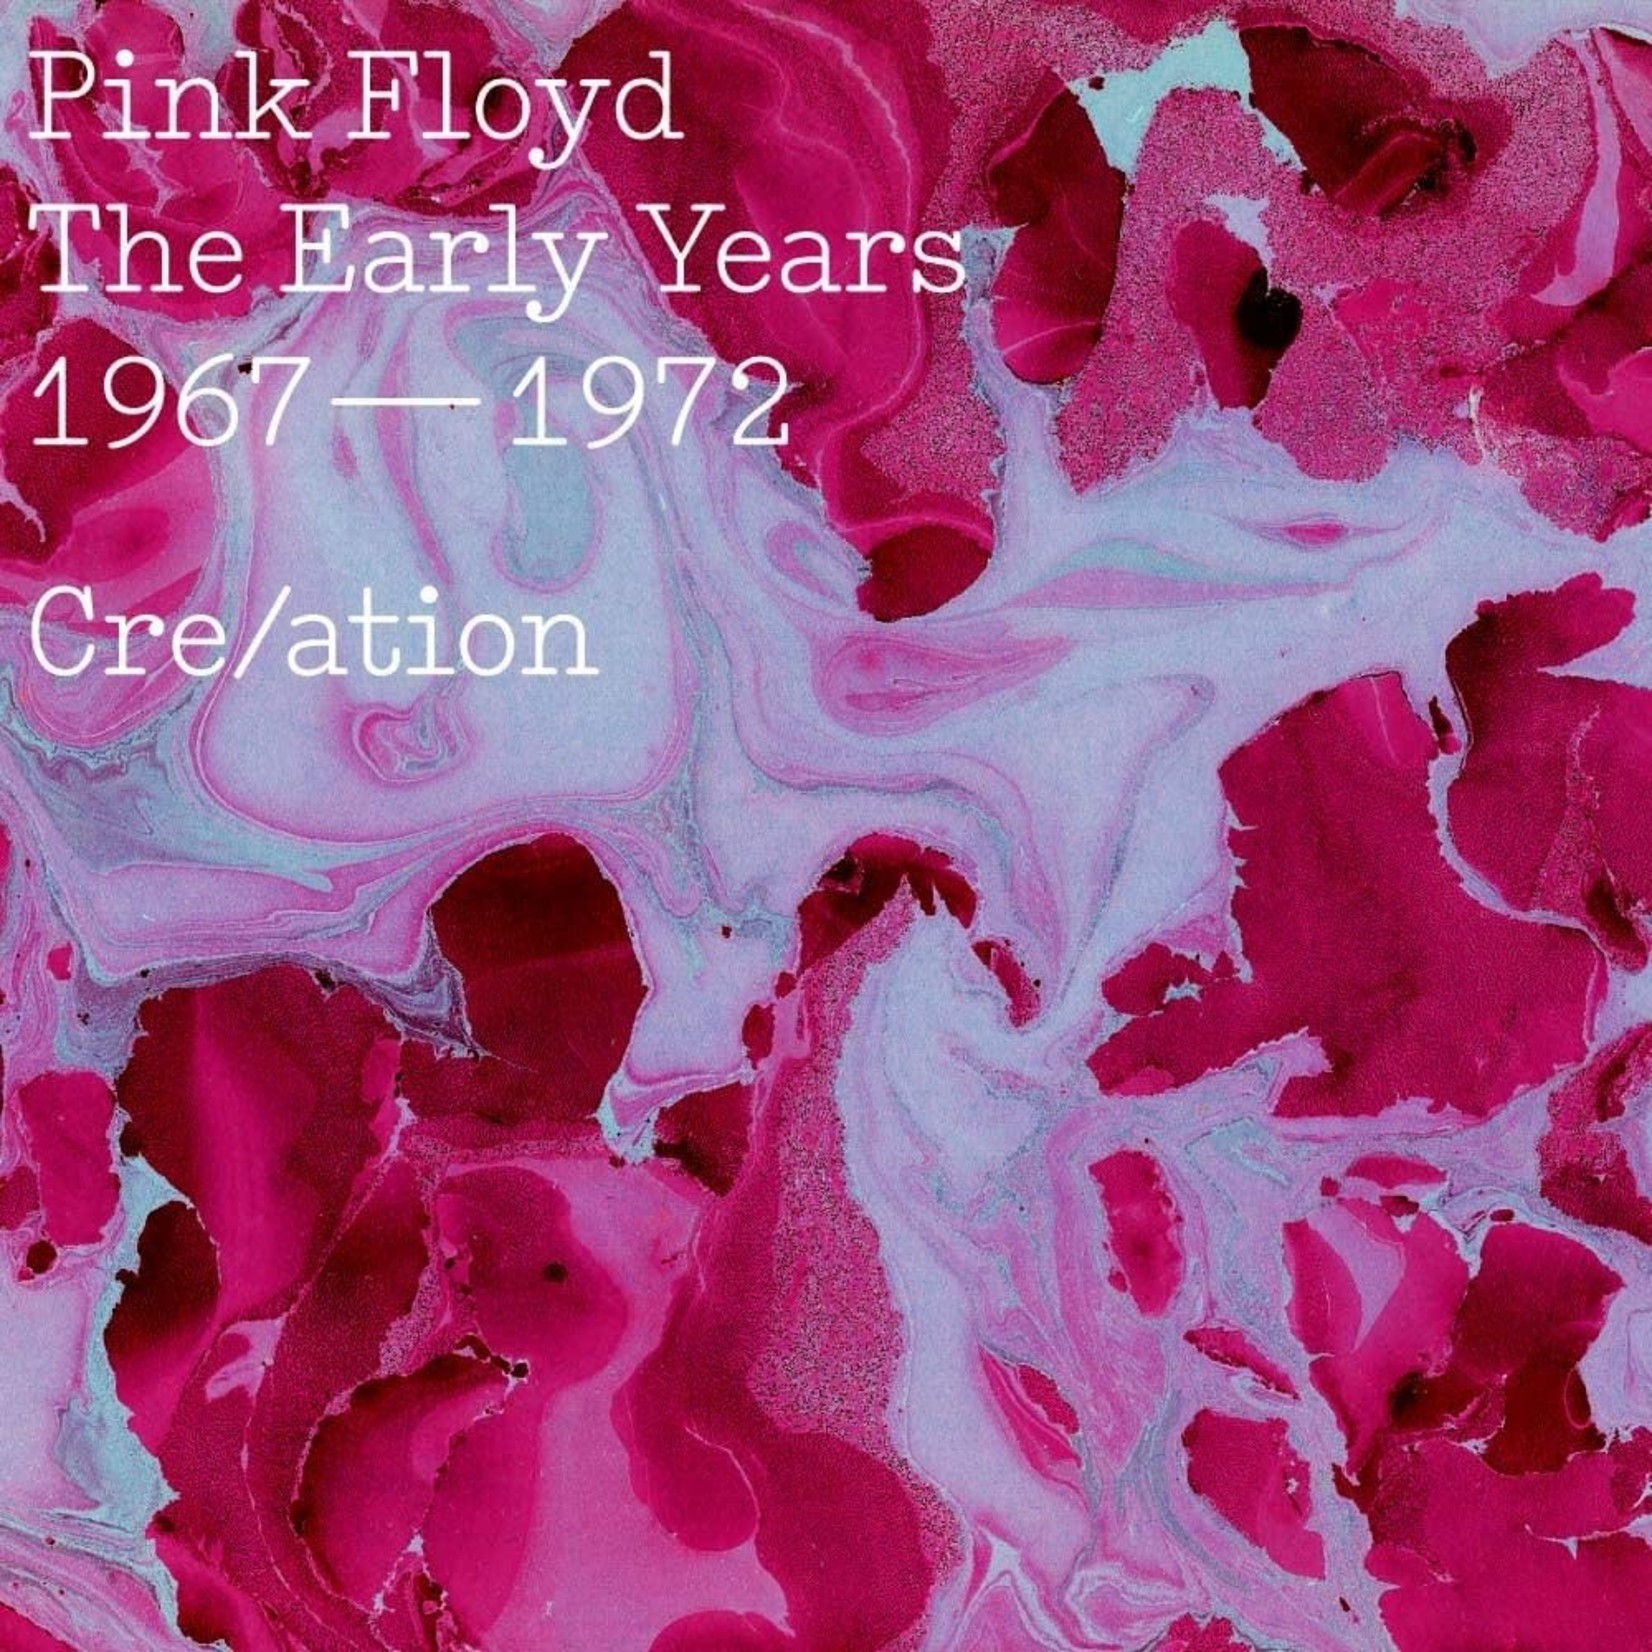 Compact Disc Pink Floyd - The Early Years, 1967-1972, Cre/Ation. CD